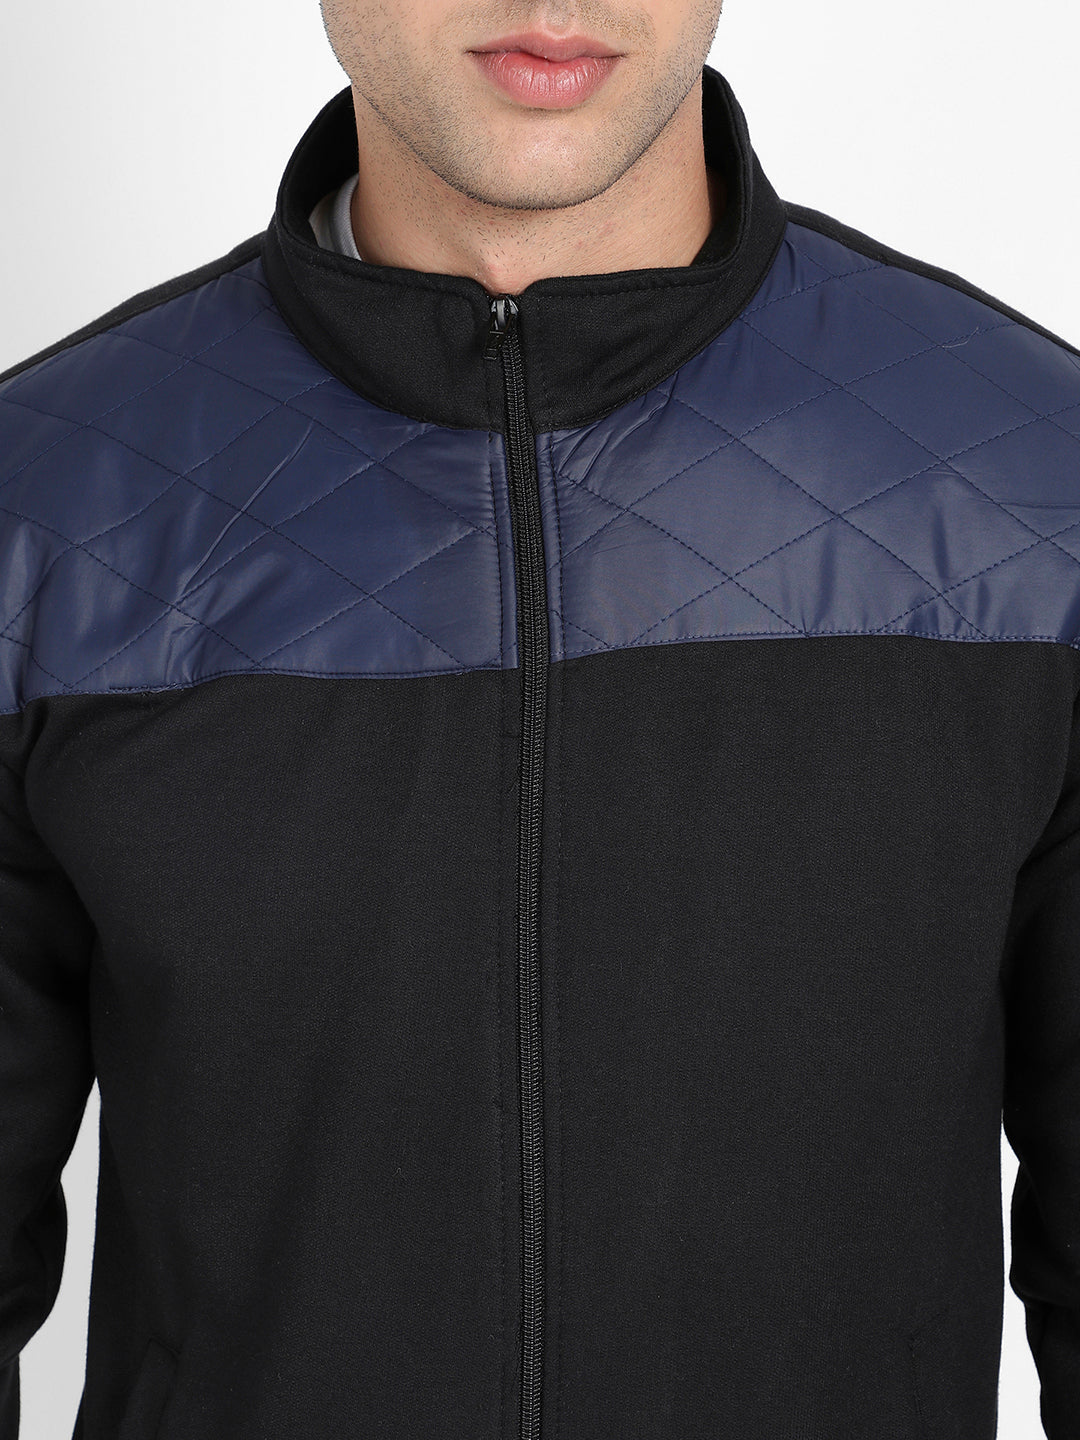 Men's Black & Blue Zip-Front Jacket With Quilted Detail